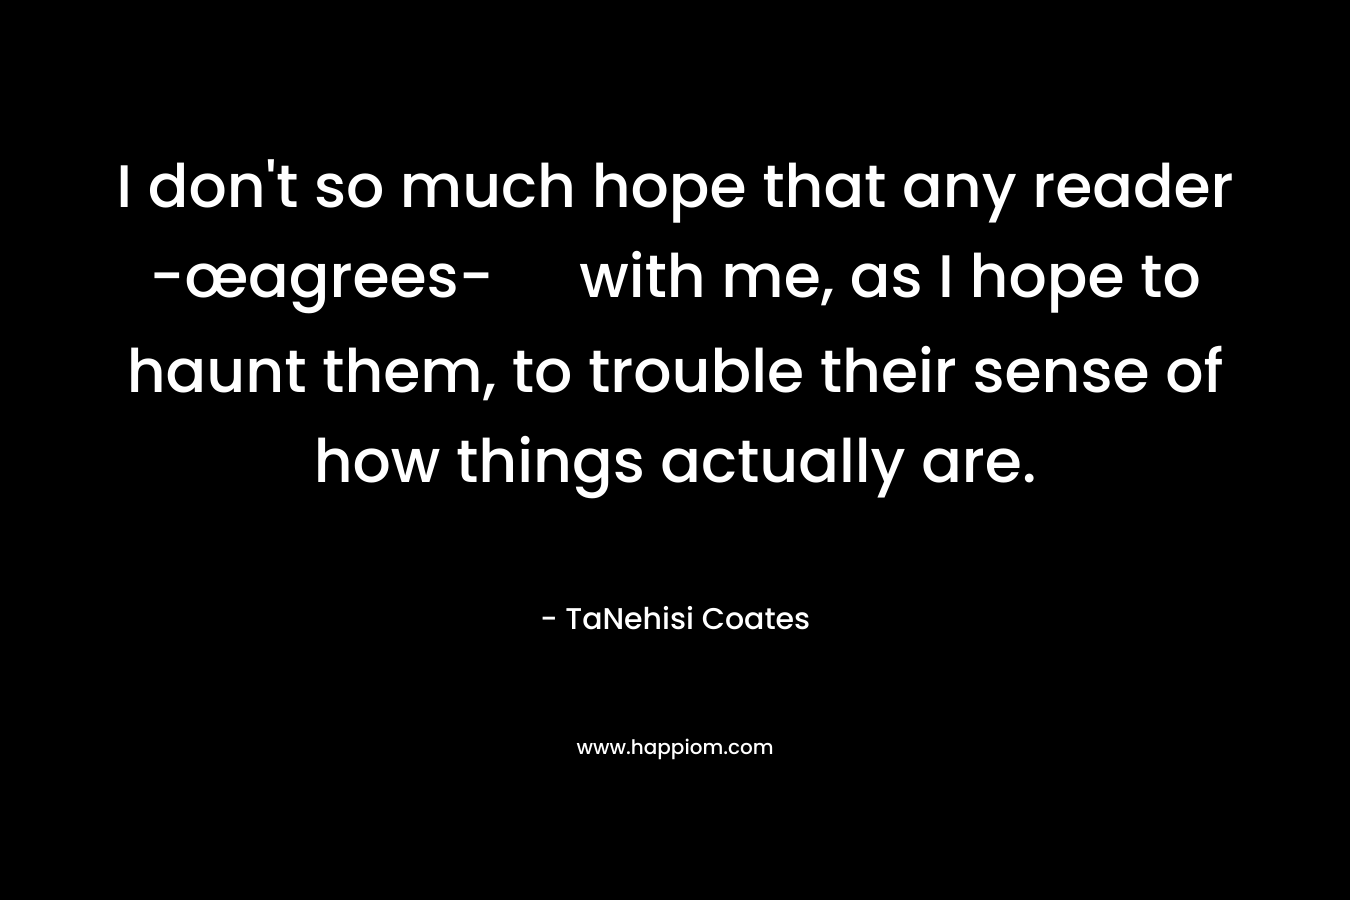 I don’t so much hope that any reader -œagrees- with me, as I hope to haunt them, to trouble their sense of how things actually are. – TaNehisi Coates